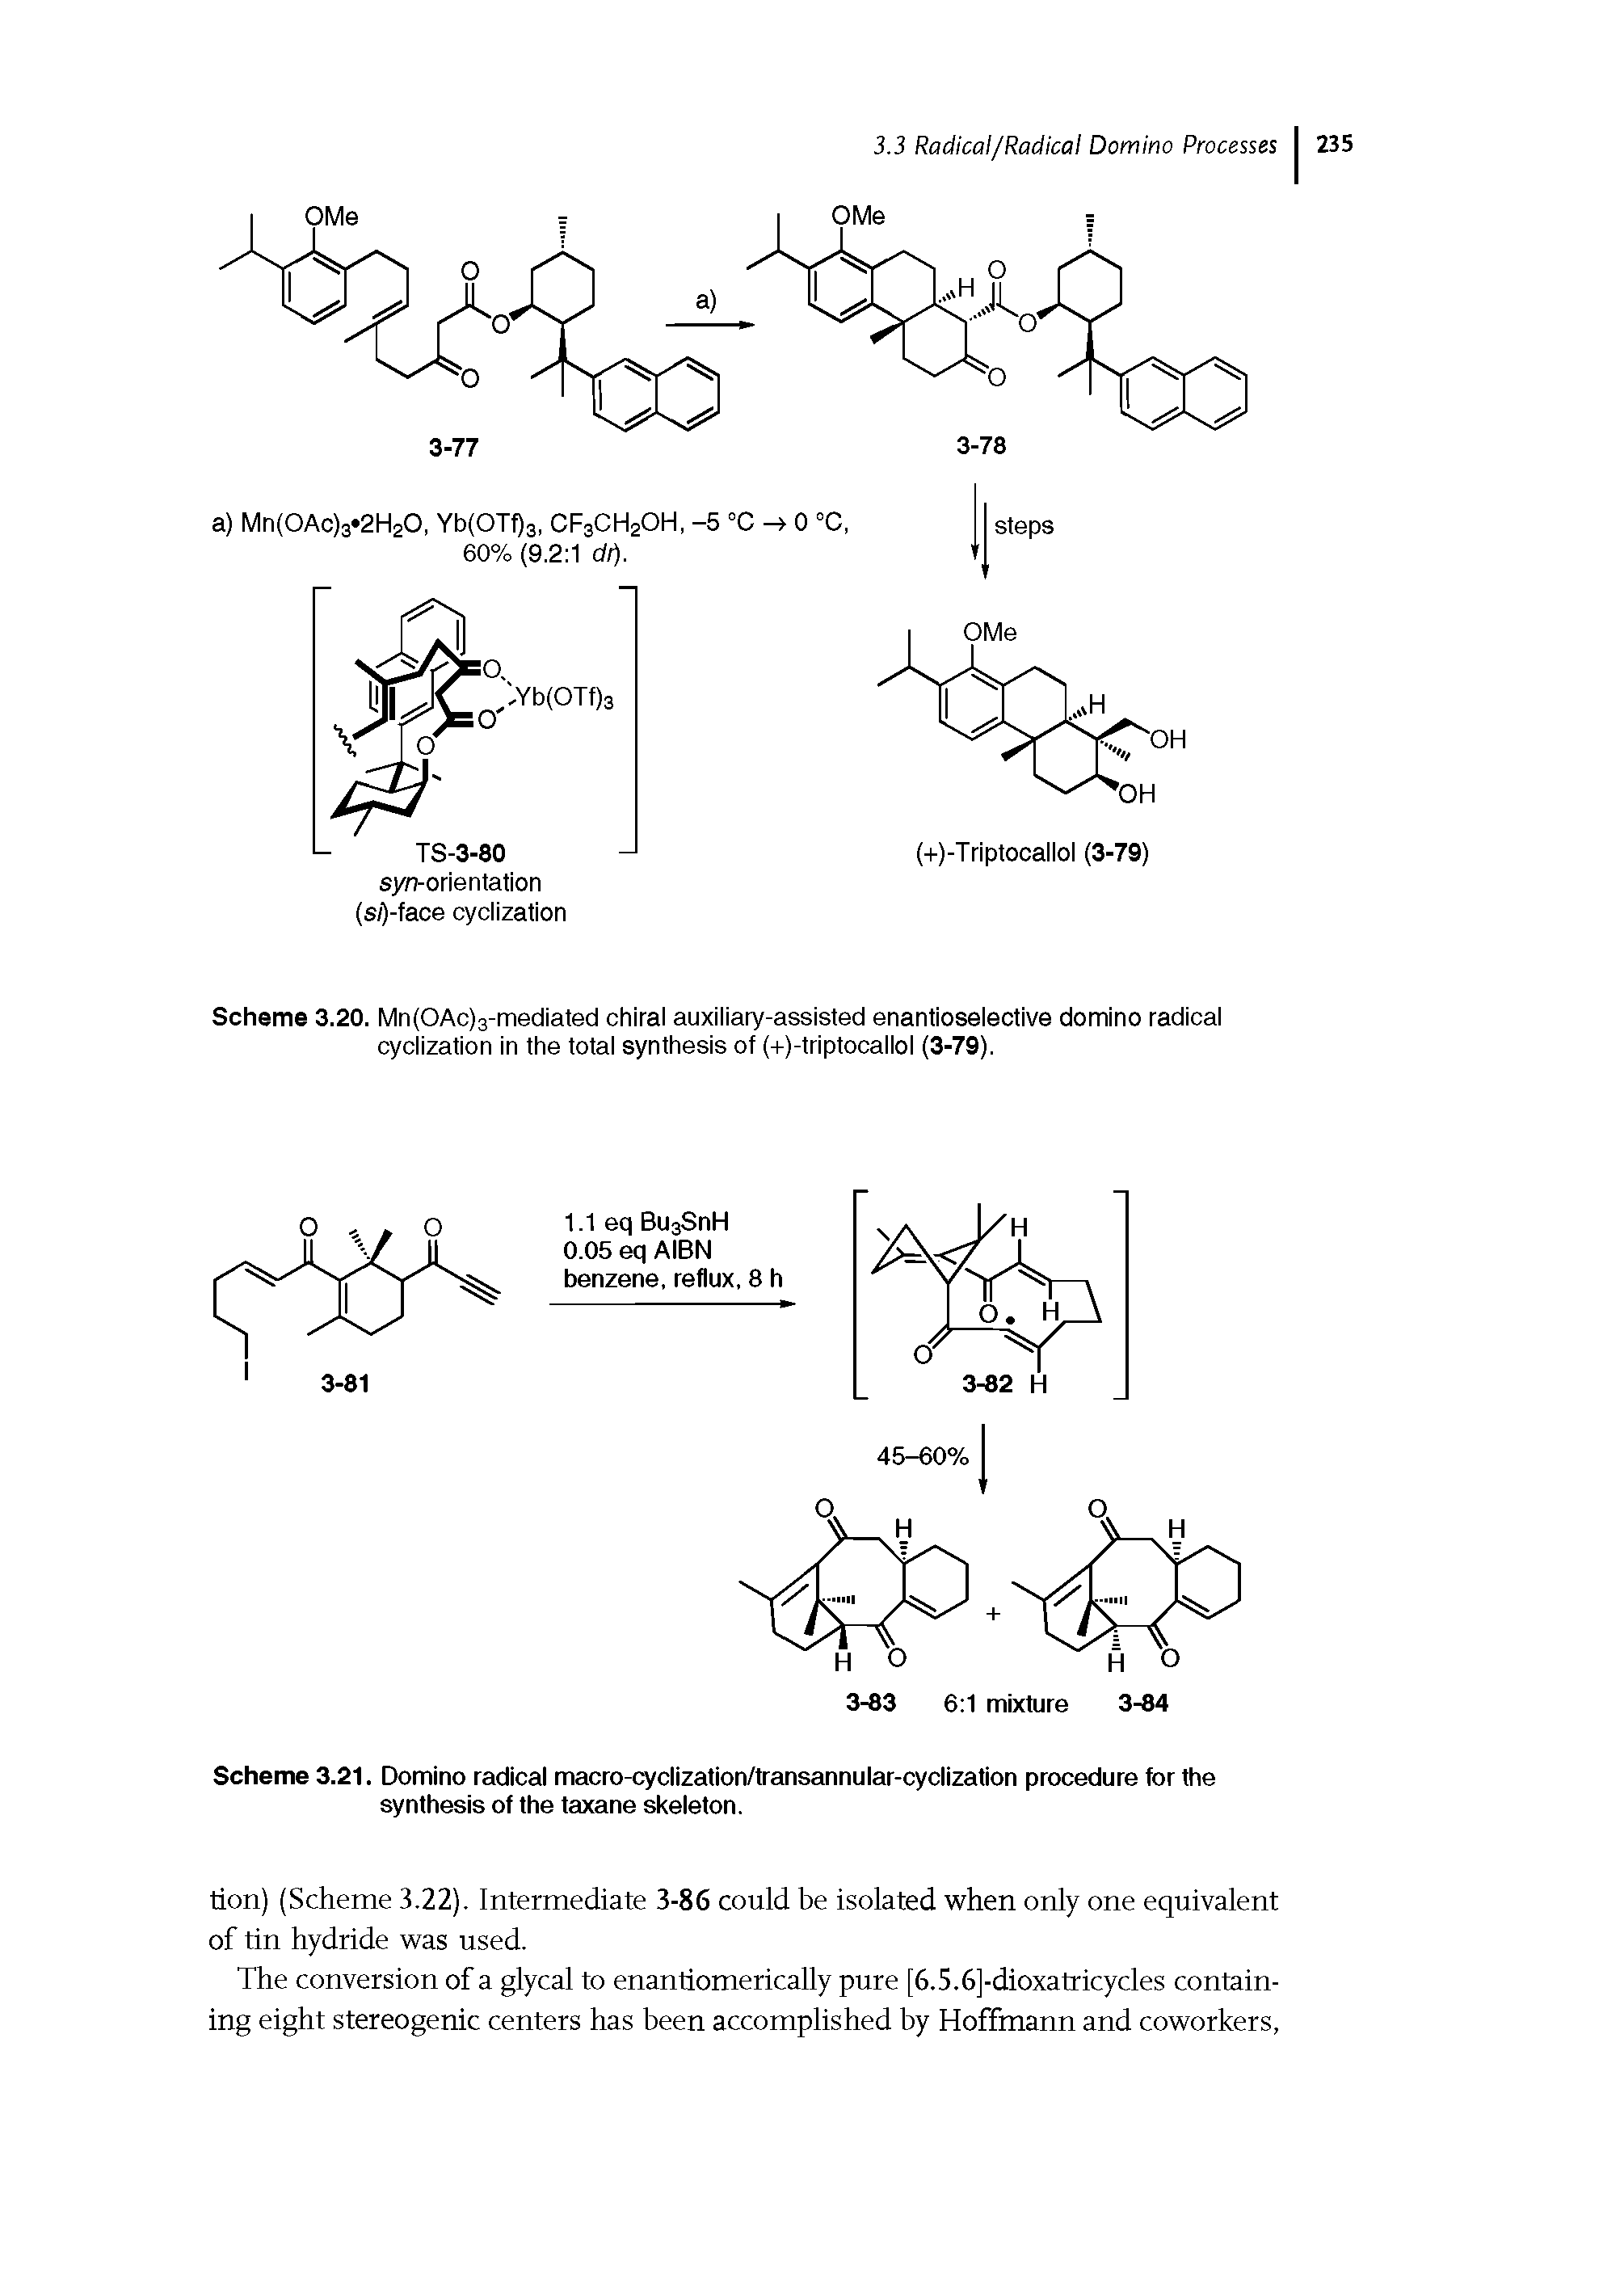 Scheme 3.20. Mn(OAc)3-mediated chiral auxiliary-assisted enantioselective domino radical cyclization in the total synthesis of (+)-triptocallol (3-79).